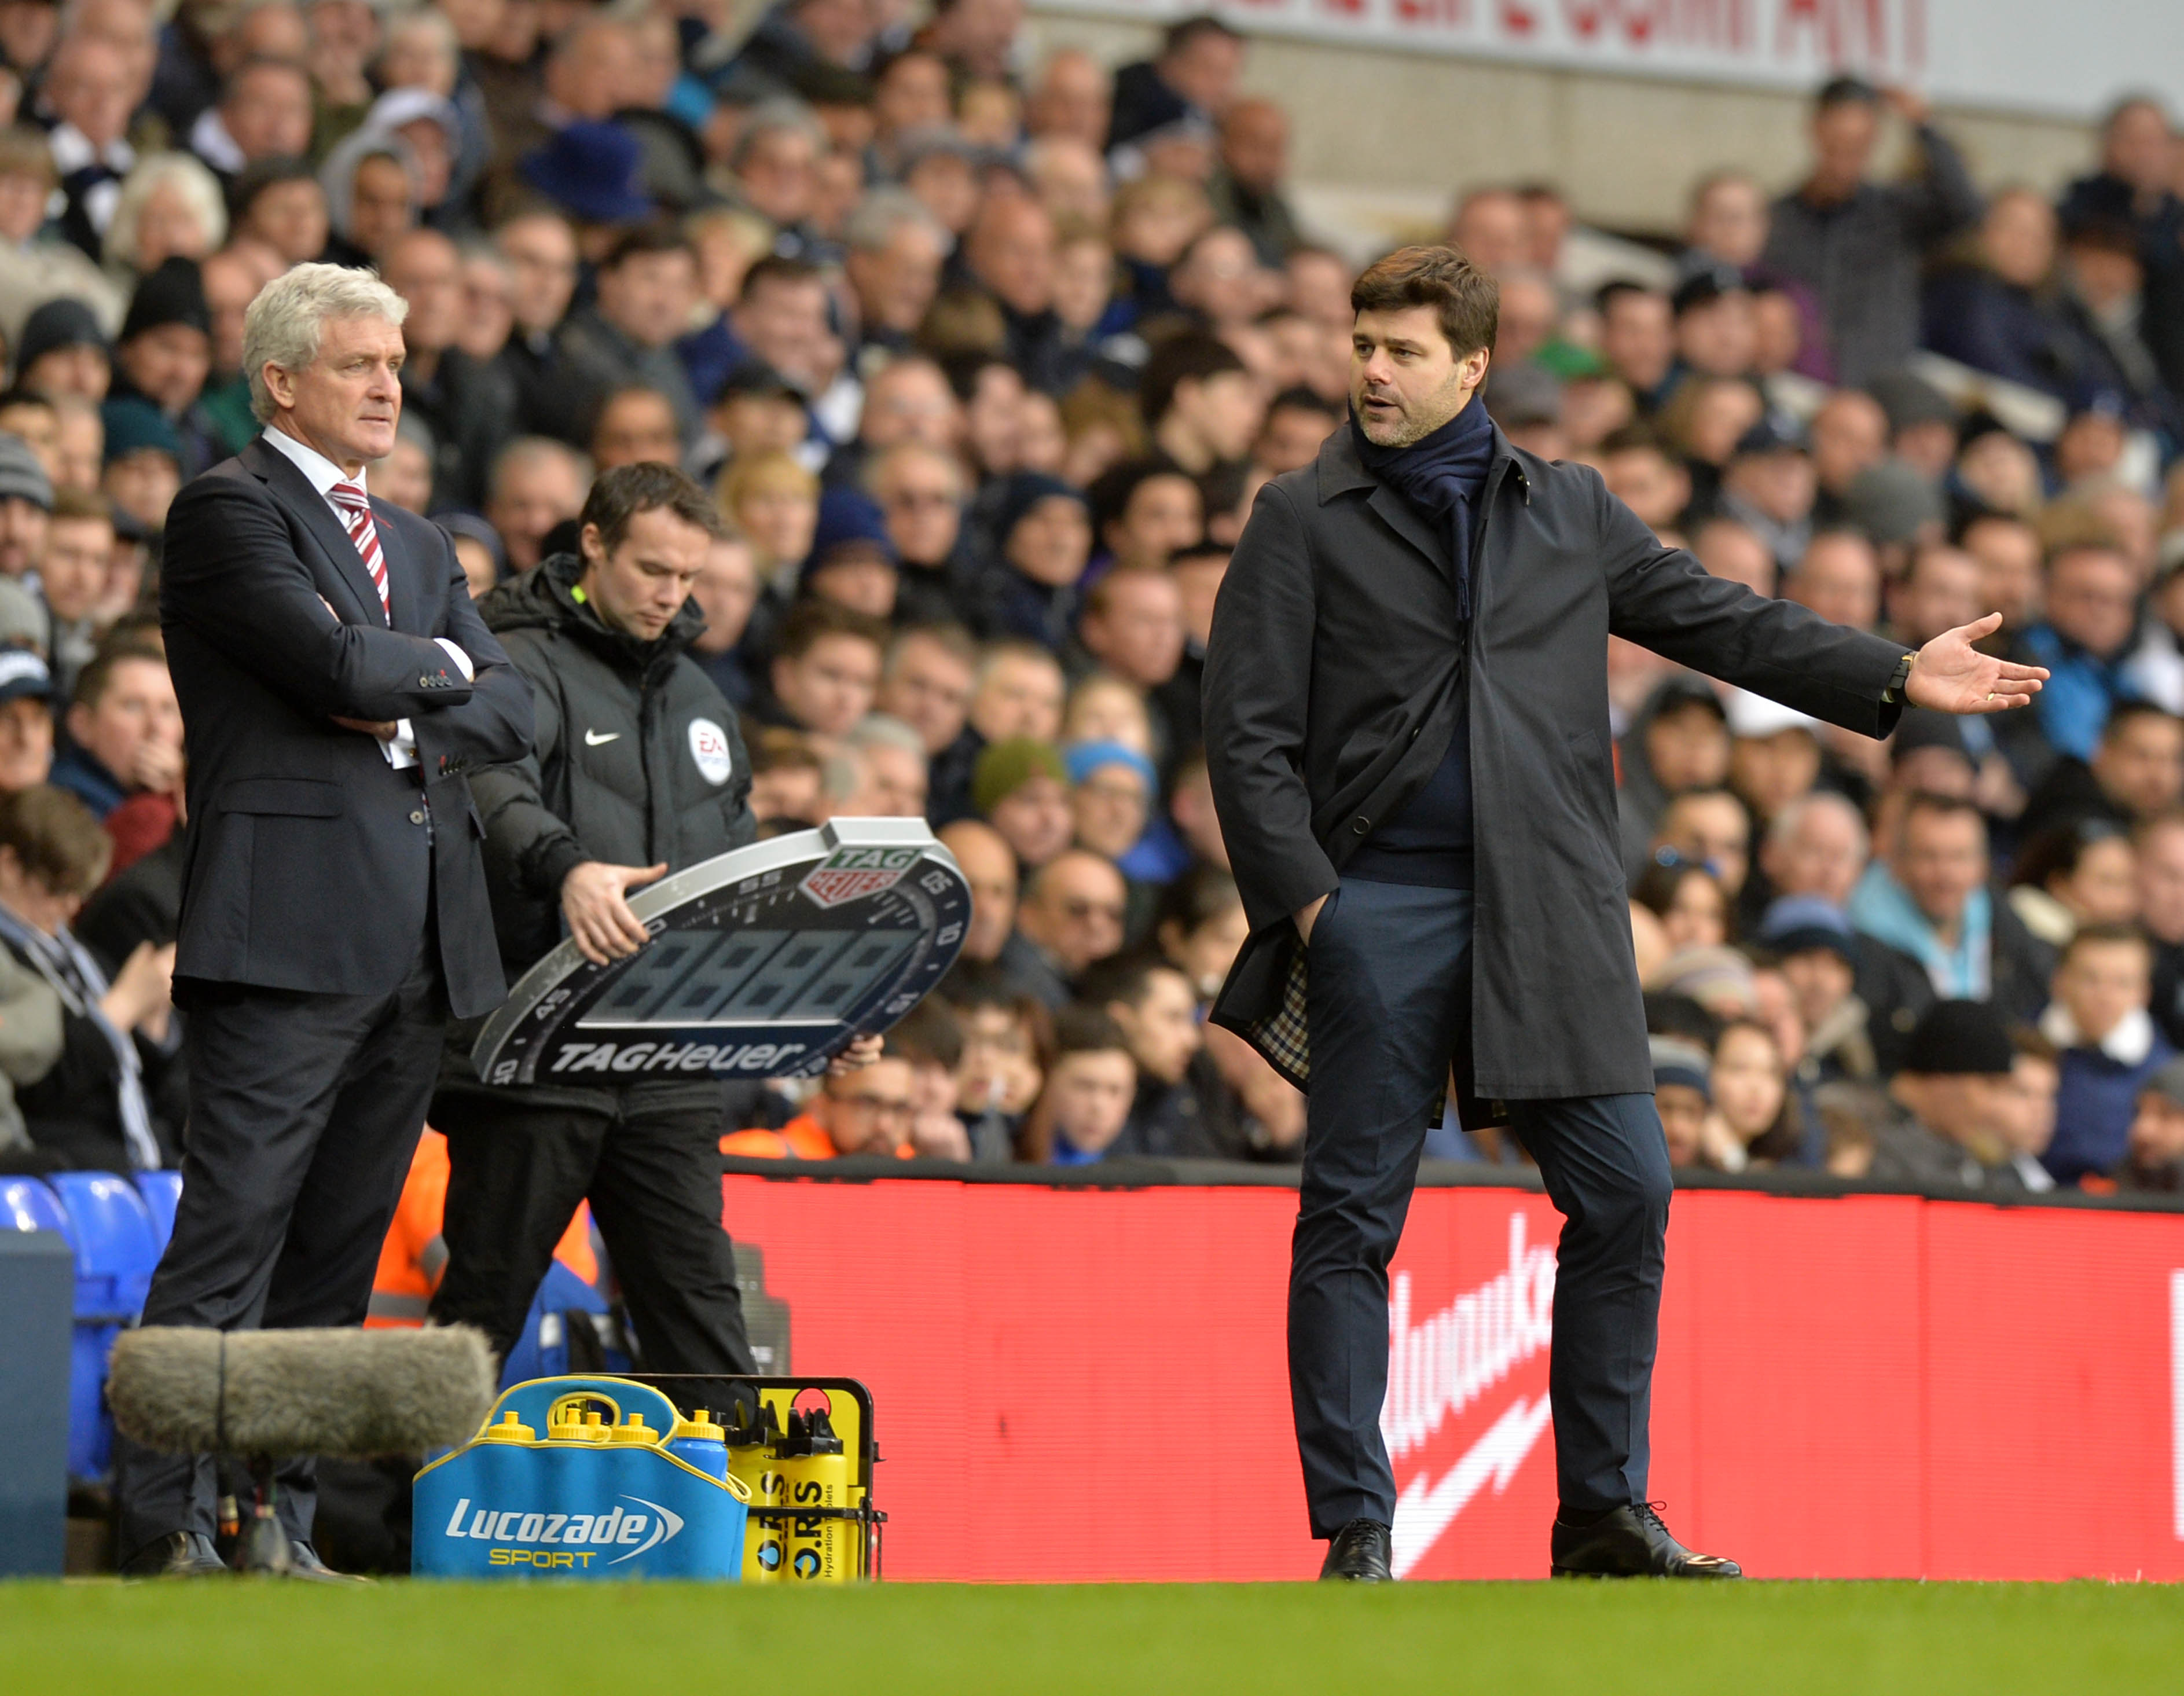 Tottenham Hotspur's Argentinian head coach Mauricio Pochettino (R) gestures as he talks with Stoke City's Welsh manager Mark Hughes (L) during the English Premier League football match between Tottenham Hotspur and Stoke City at White Hart Lane in London, on February 26, 2017. / AFP / OLLY GREENWOOD / RESTRICTED TO EDITORIAL USE. No use with unauthorized audio, video, data, fixture lists, club/league logos or 'live' services. Online in-match use limited to 75 images, no video emulation. No use in betting, games or single club/league/player publications.  /         (Photo credit should read OLLY GREENWOOD/AFP/Getty Images)